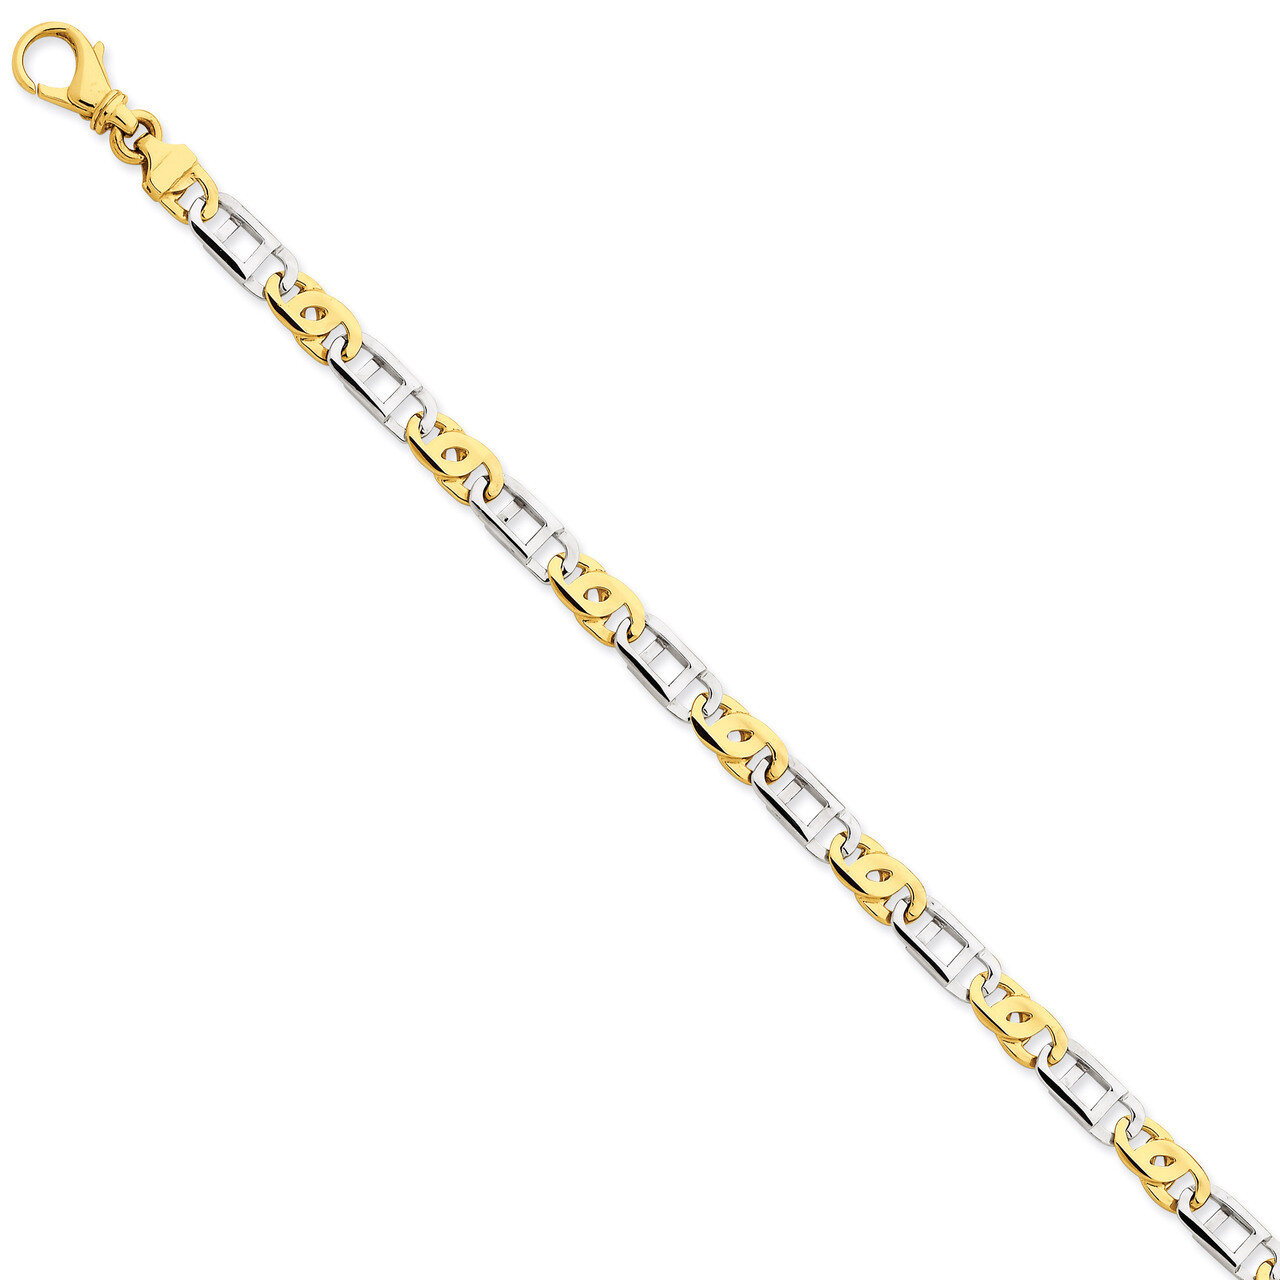 5.8mm Polished Fancy Link Chain 18 Inch 14k Two-Tone Gold LK522-18